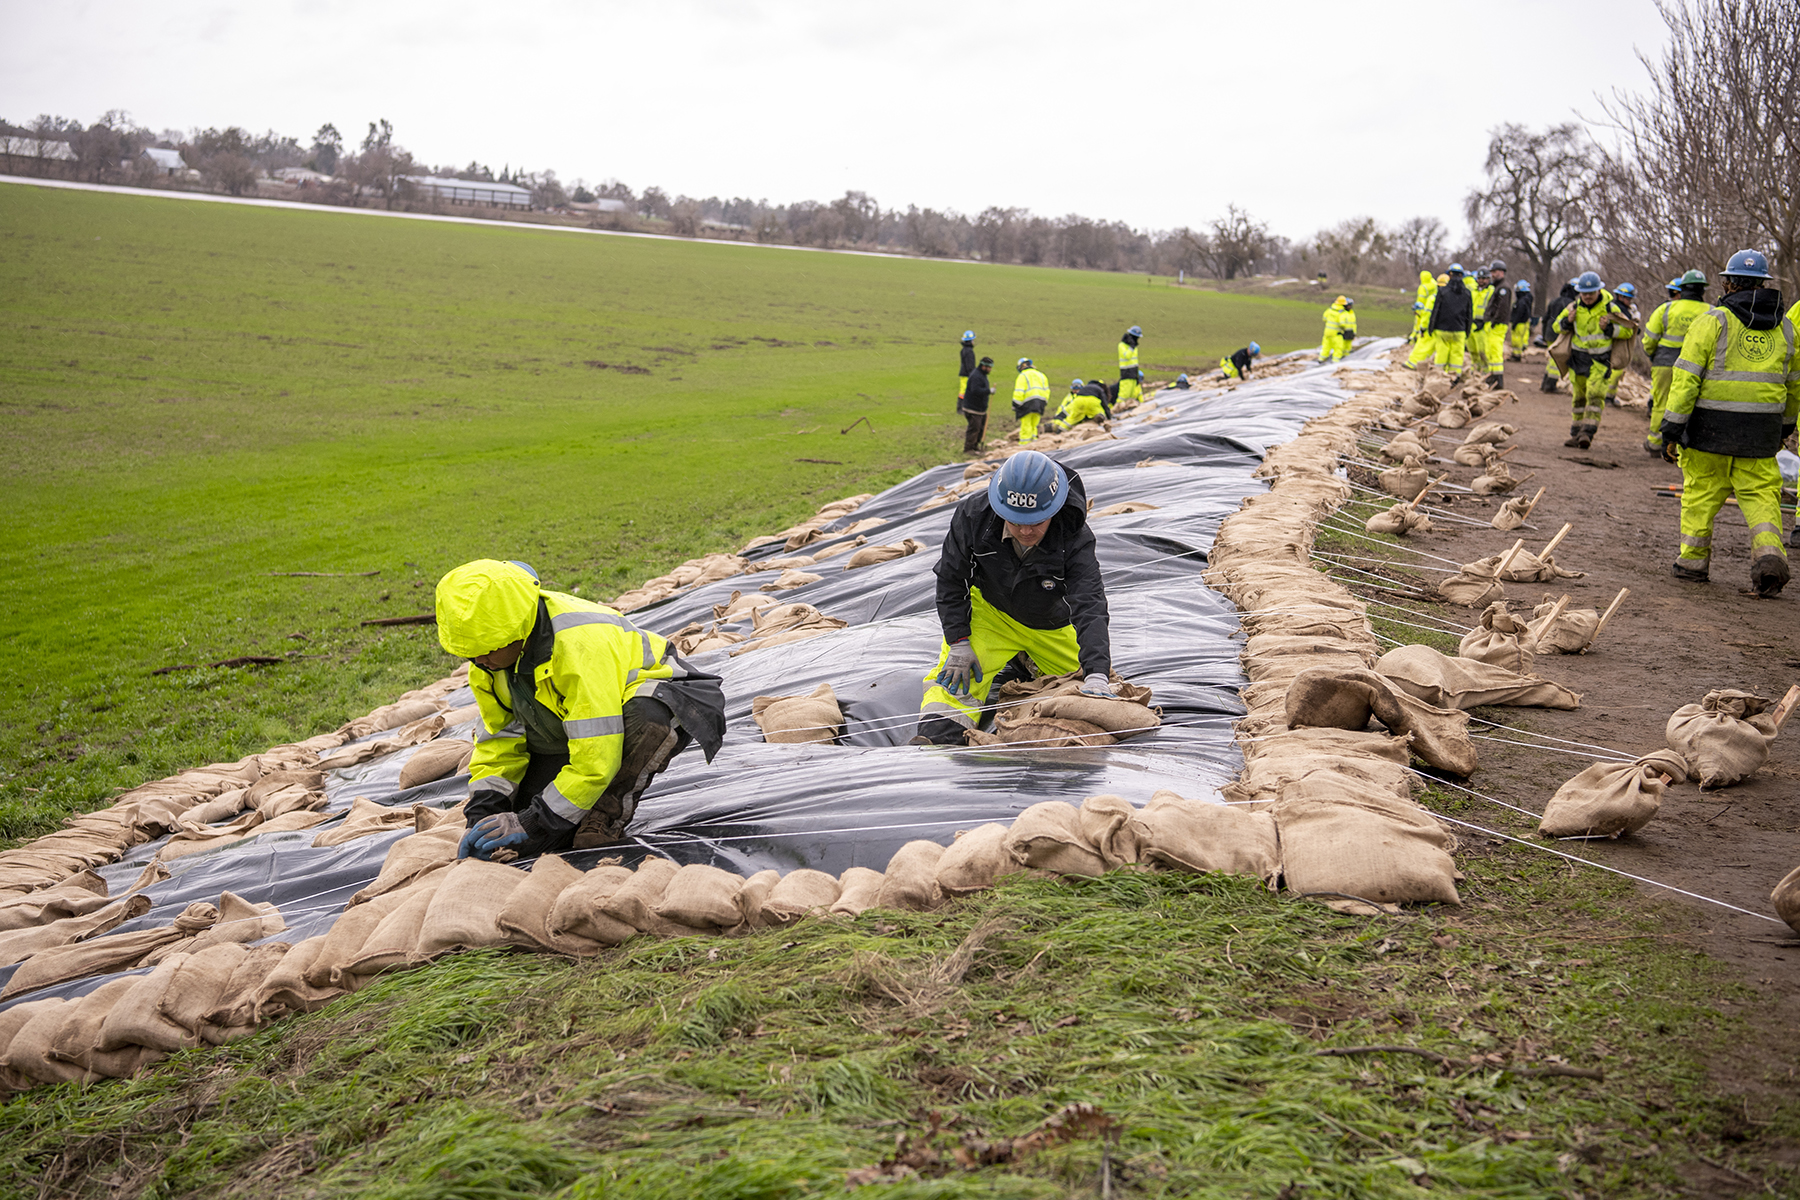 Members of the California Conservation Corps perform emergency repairs to damaged sections of a levee along the Cosumnes River in Wilton, California. (Image courtesy of Kenneth James/California Department of Water Resources)